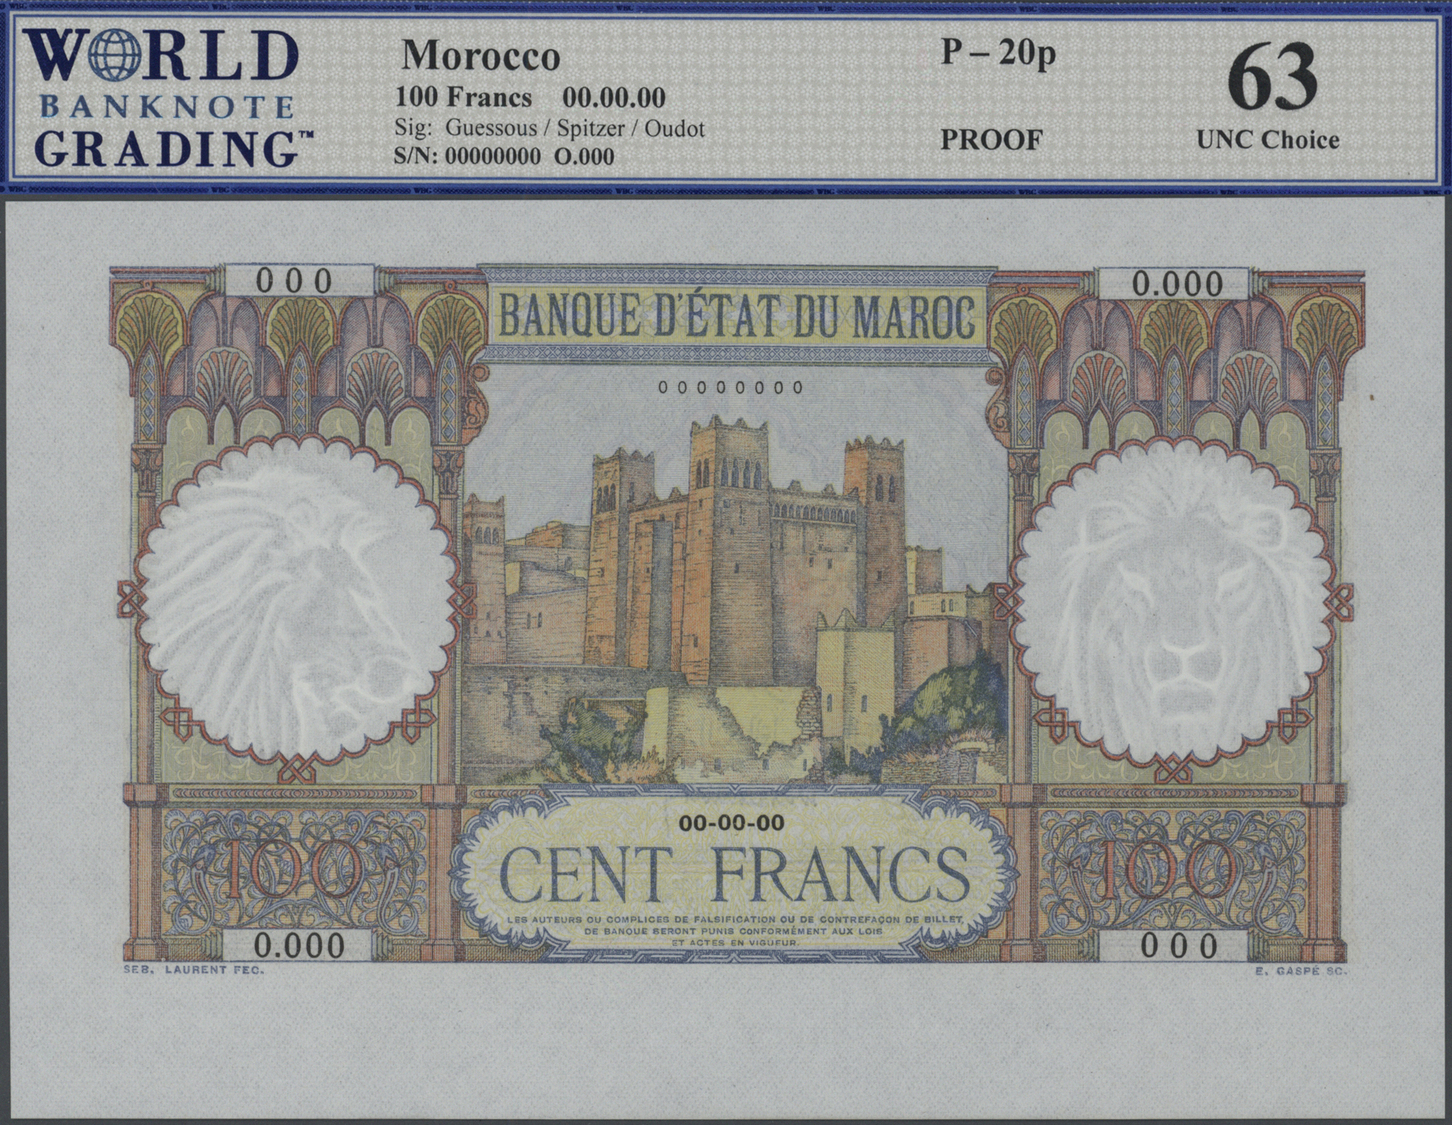 01743 Morocco / Marokko: Very Rare Specimen / Proof Print Of 100 Francs P. 20s/p With Zero Serial Numbers, Larger Border - Morocco